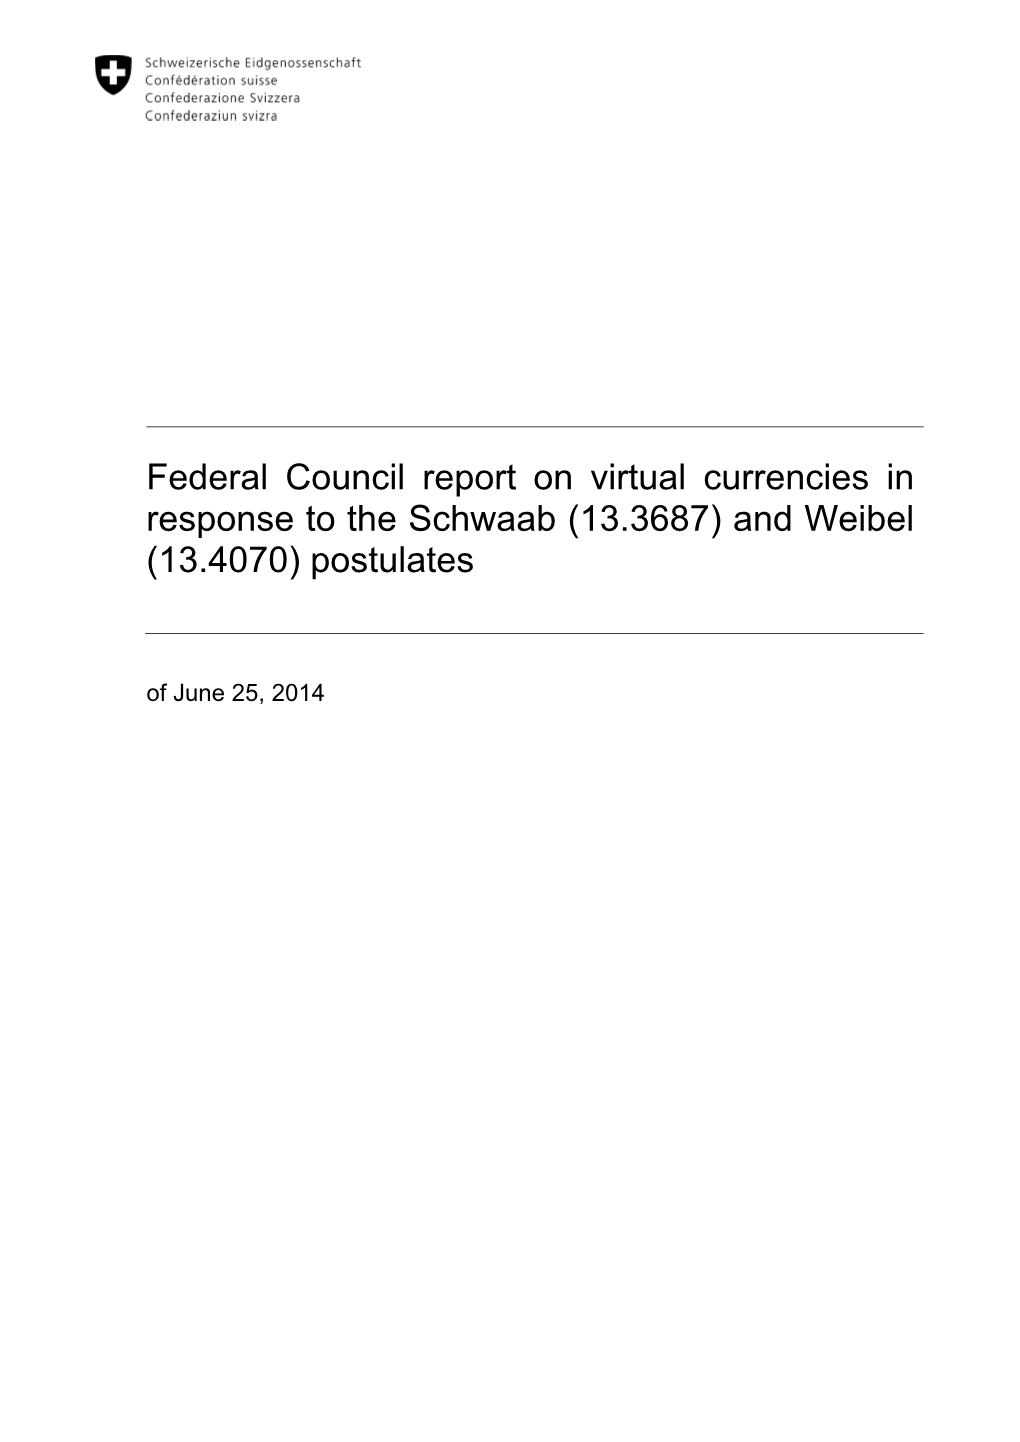 Federal Council Report on Virtual Currencies in Response to the Schwaab (13.3687) and Weibel (13.4070) Postulates